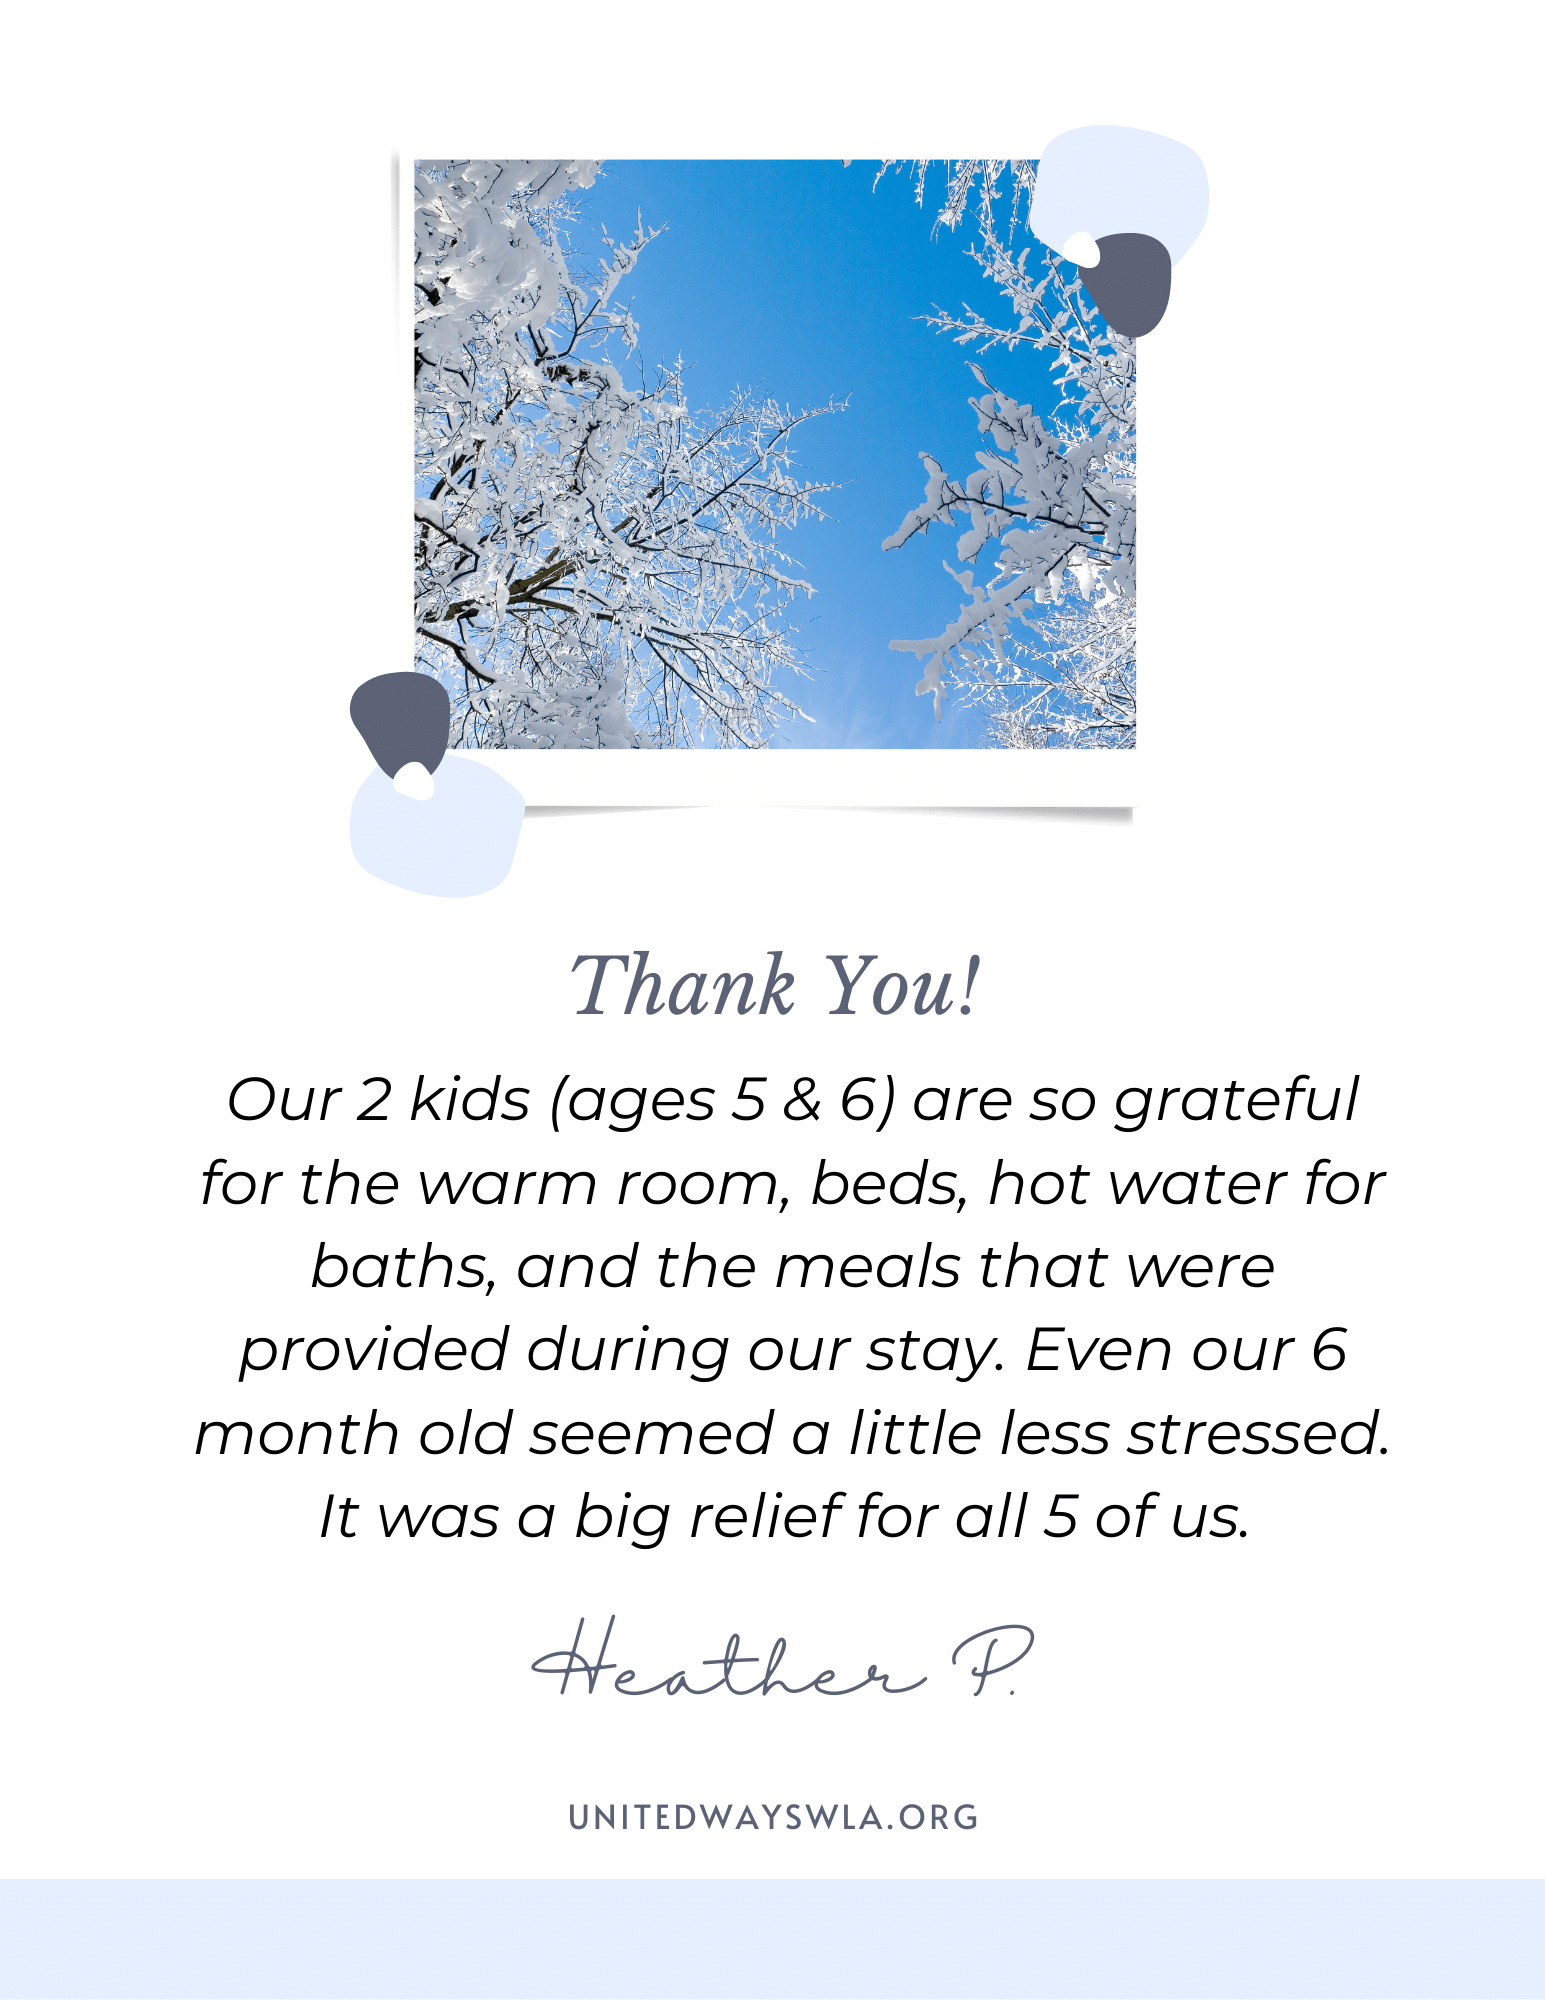 thank you from heather